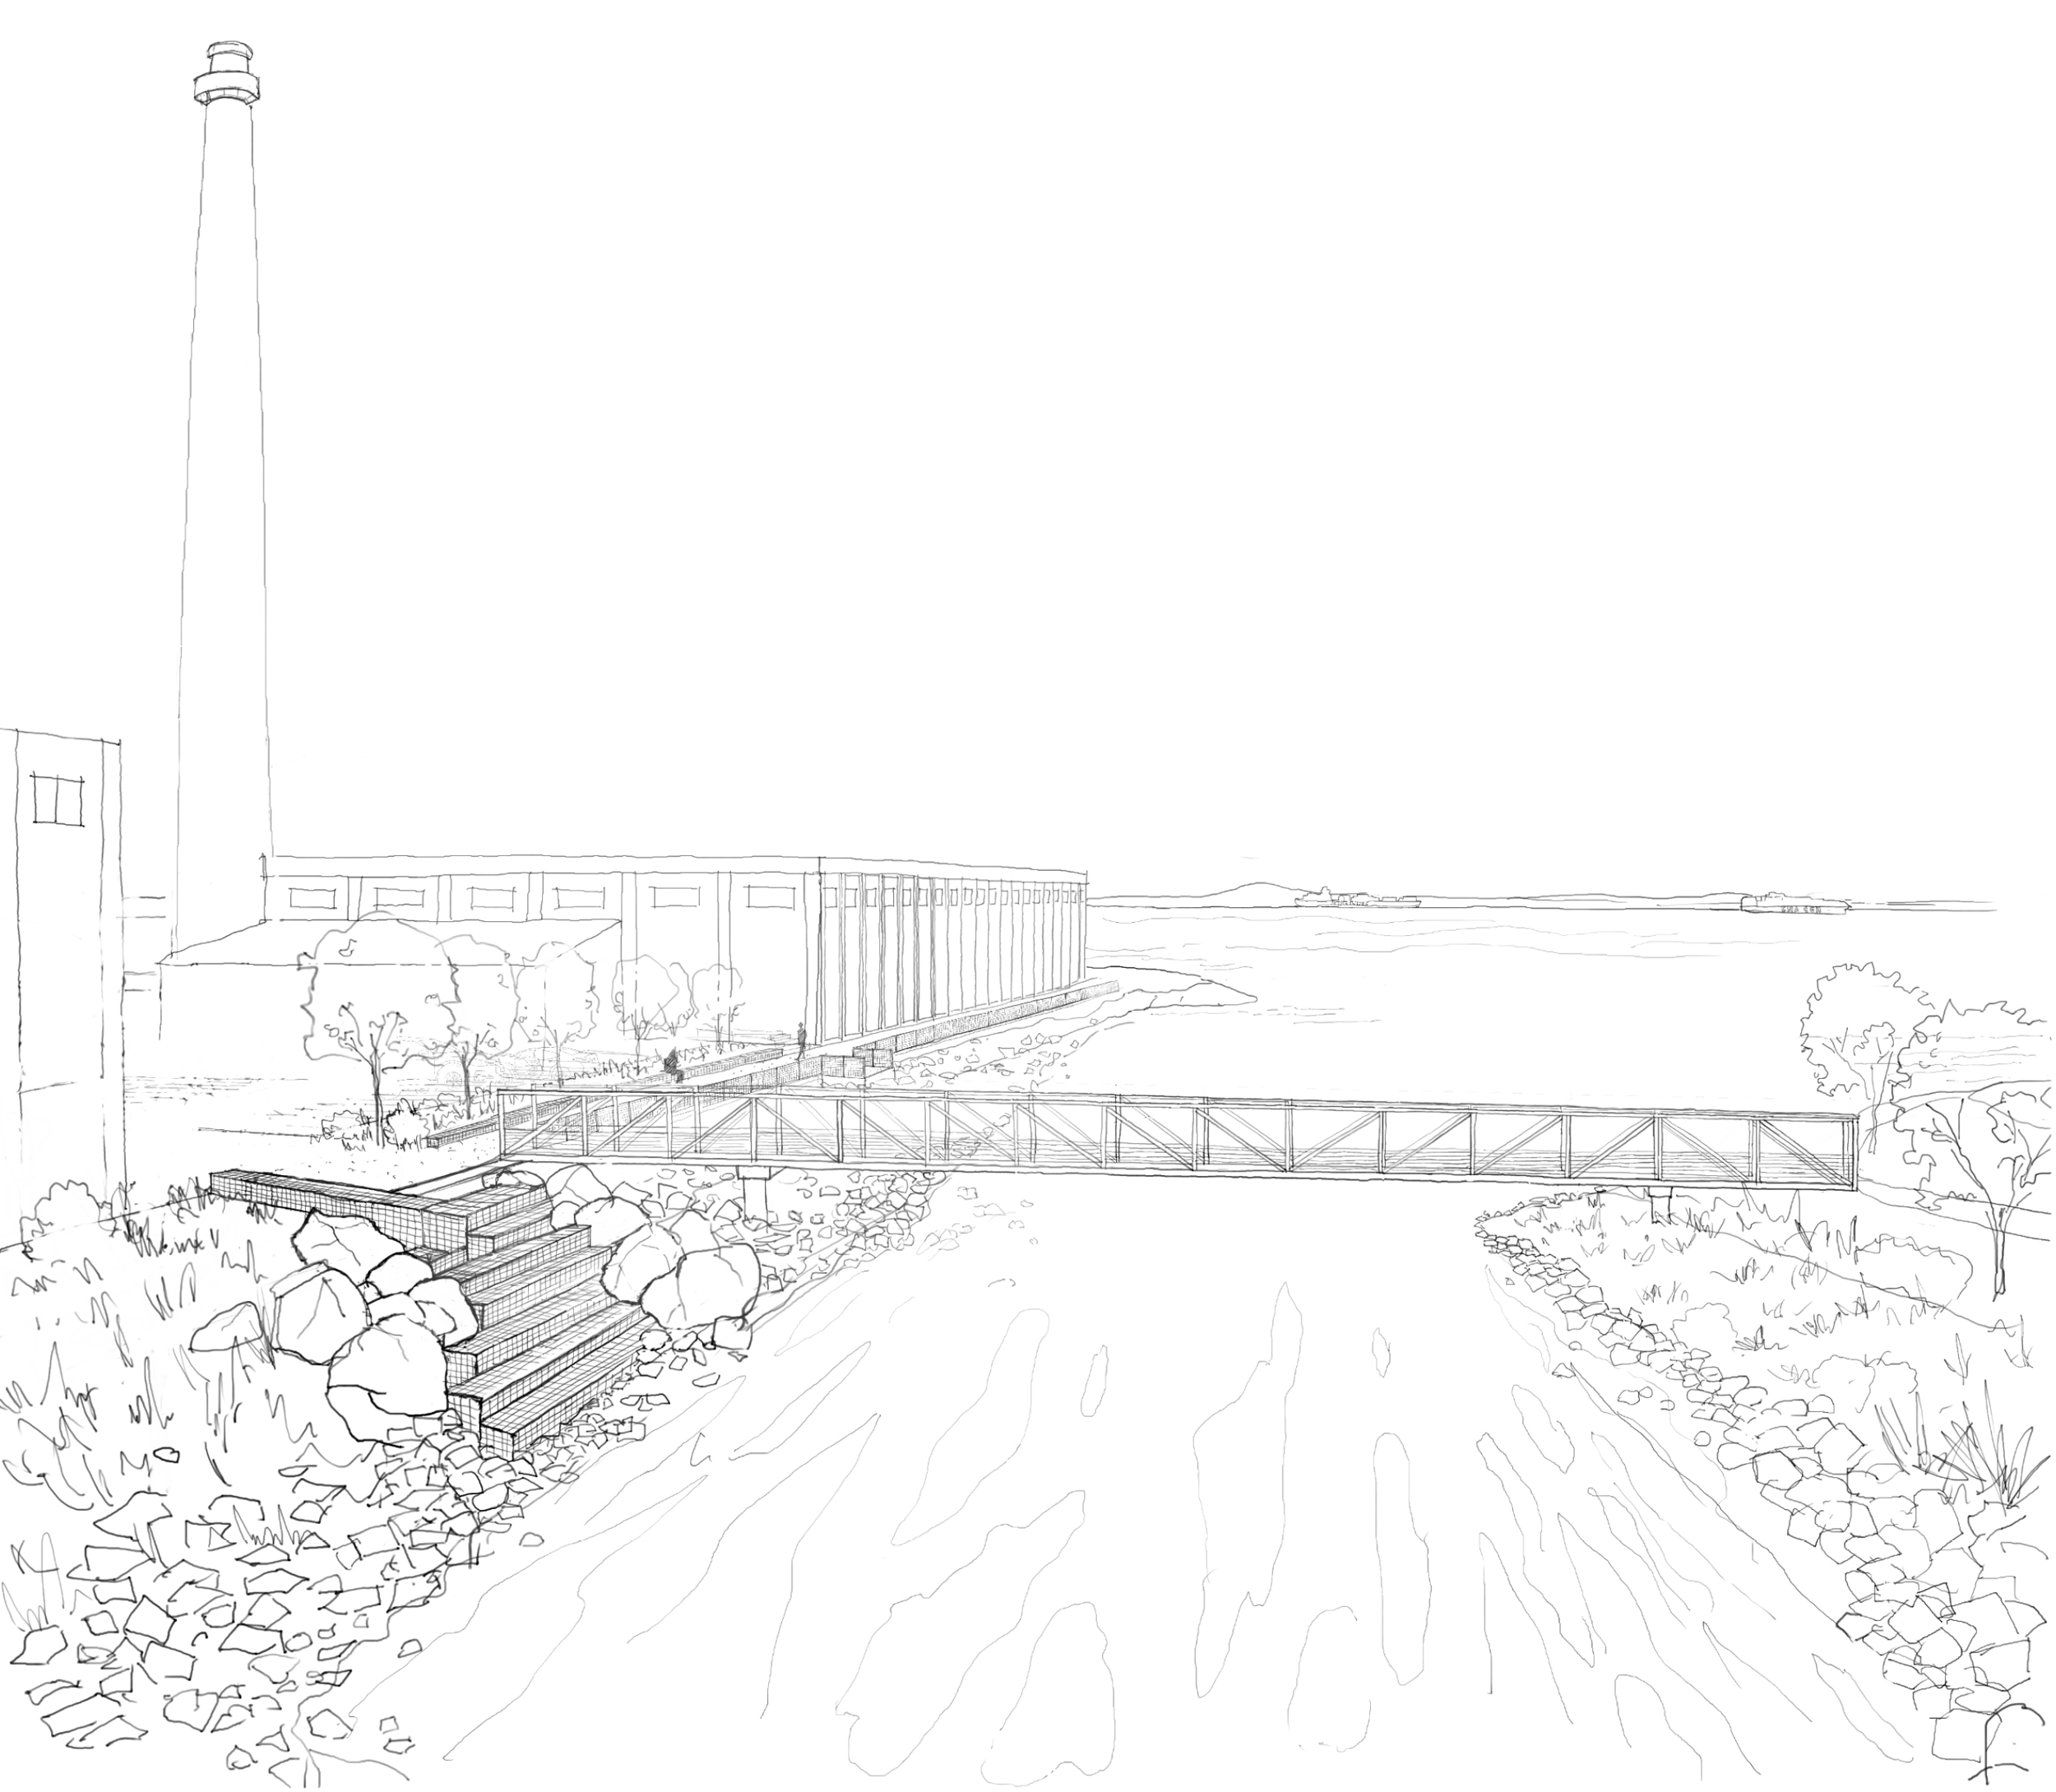 23rd Street Bay Trail extension over Warm Water Cove, illustration by Groundworks Office